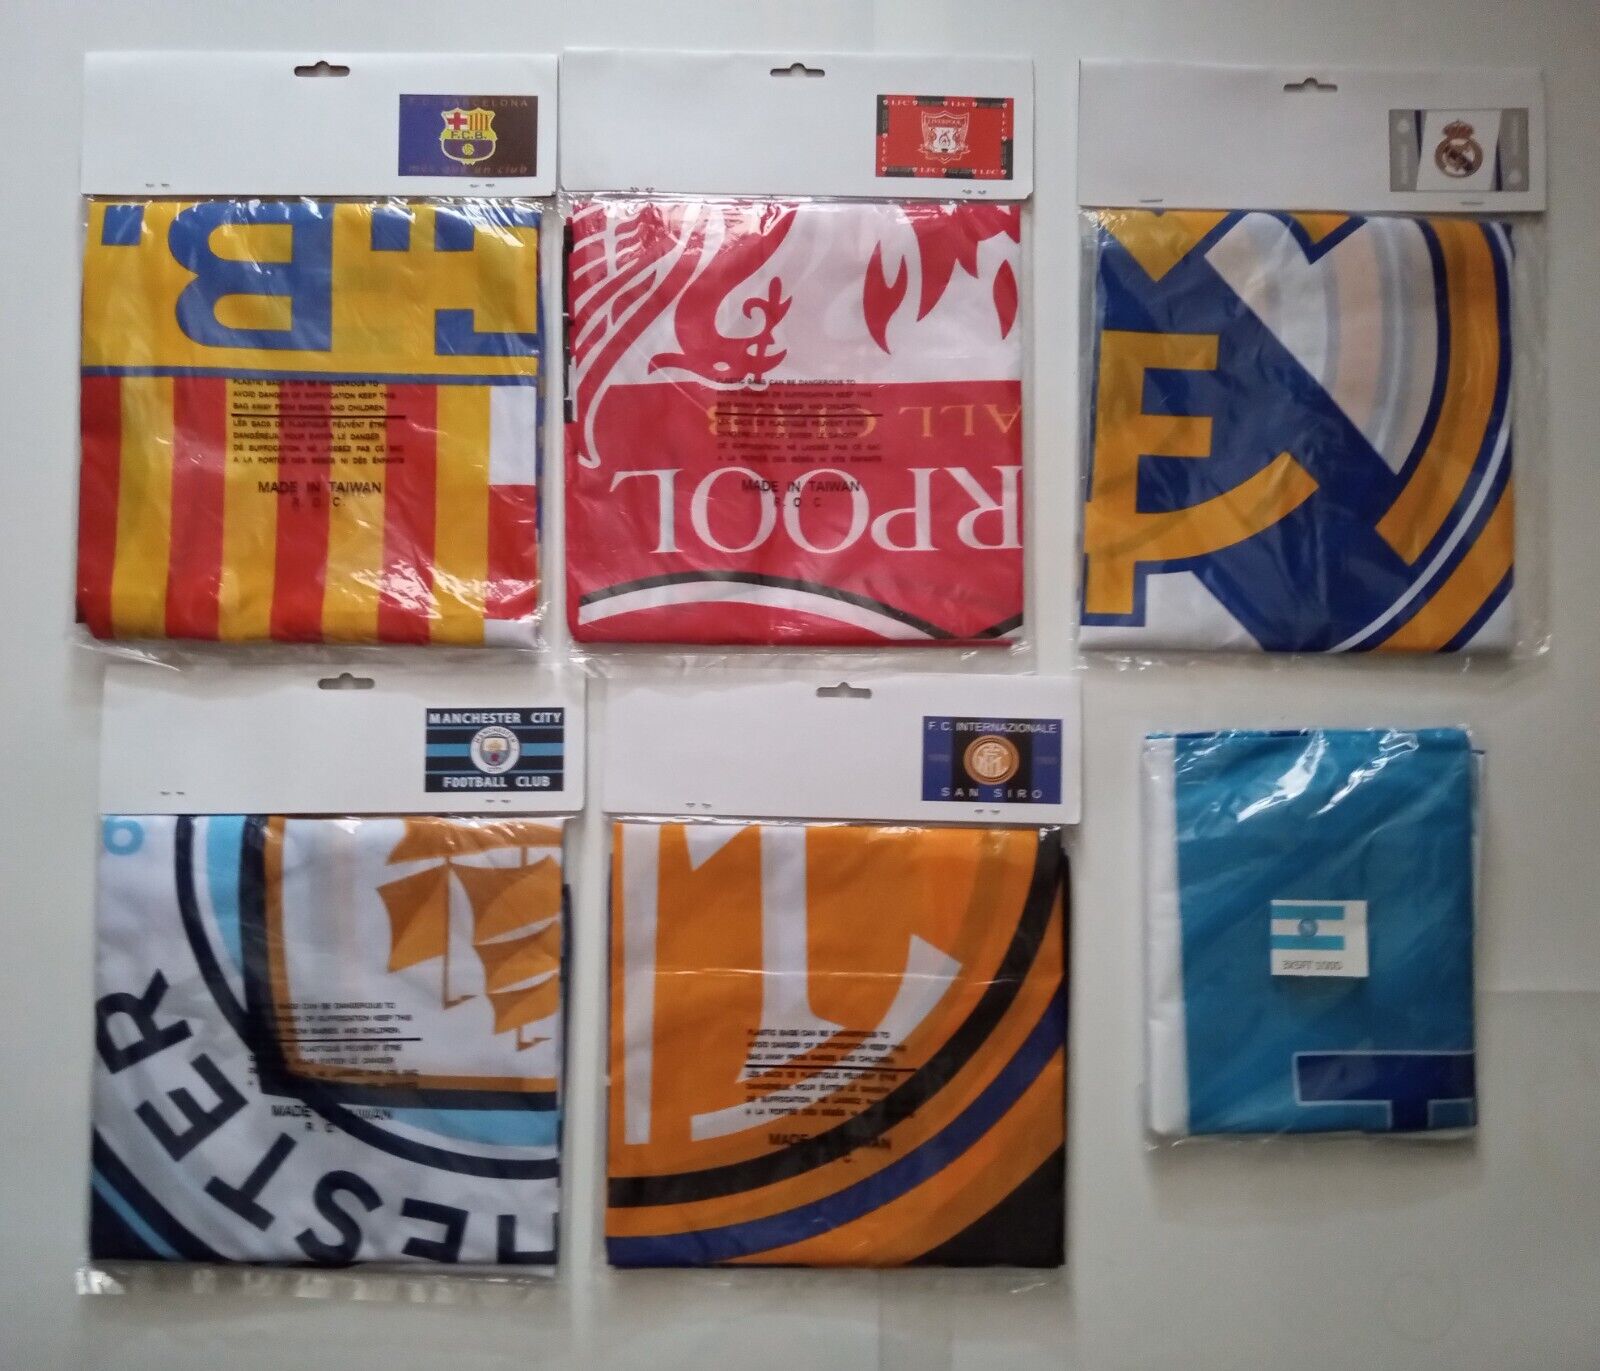 6 CHAMPION'S LEAGUE FLAGS MAN-CITY+BARCA+INTER+REAL MADRID+LIVERPOOL+NAPOLI $90